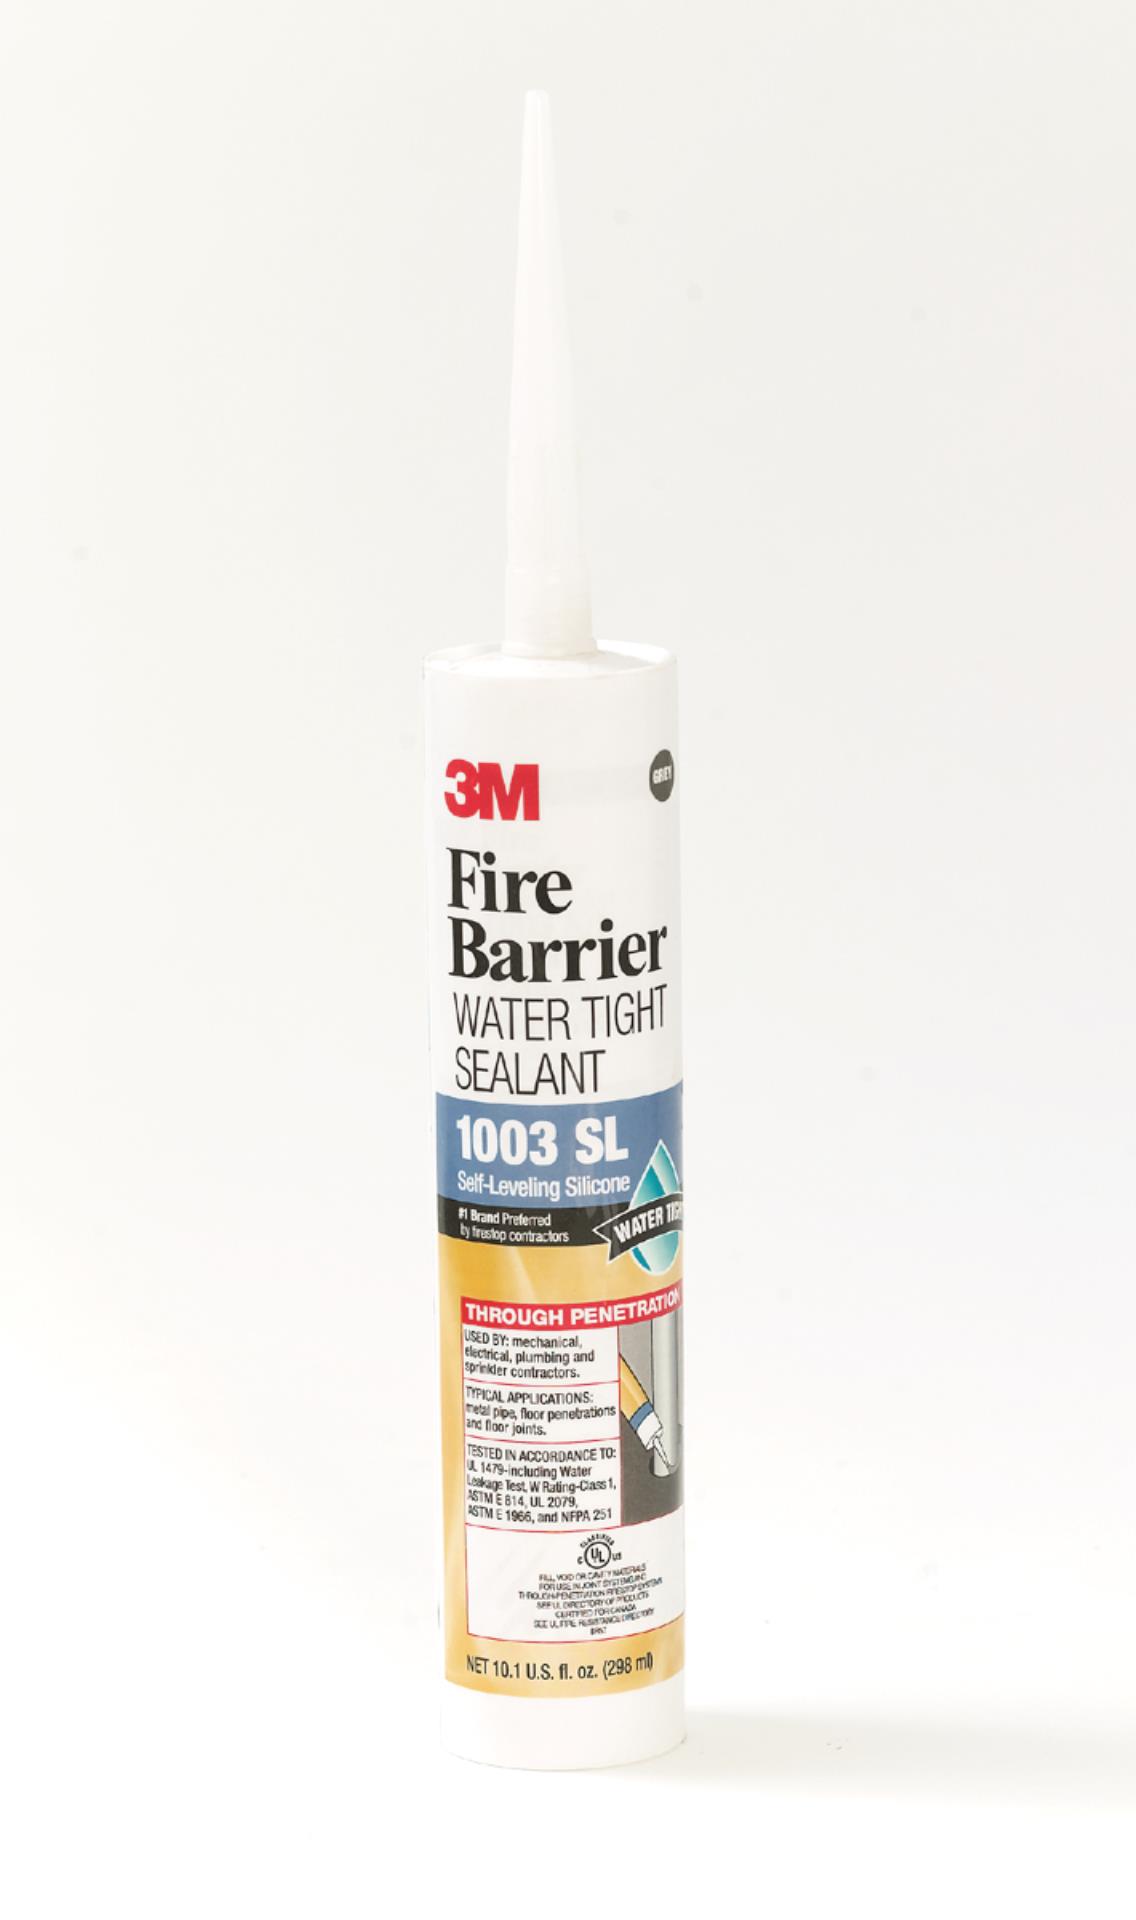 7000059414 - 3M™ Fire Barrier Water Tight Sealant 1003 SL, Gray, 20 fl oz Sausage Pack, 12/case